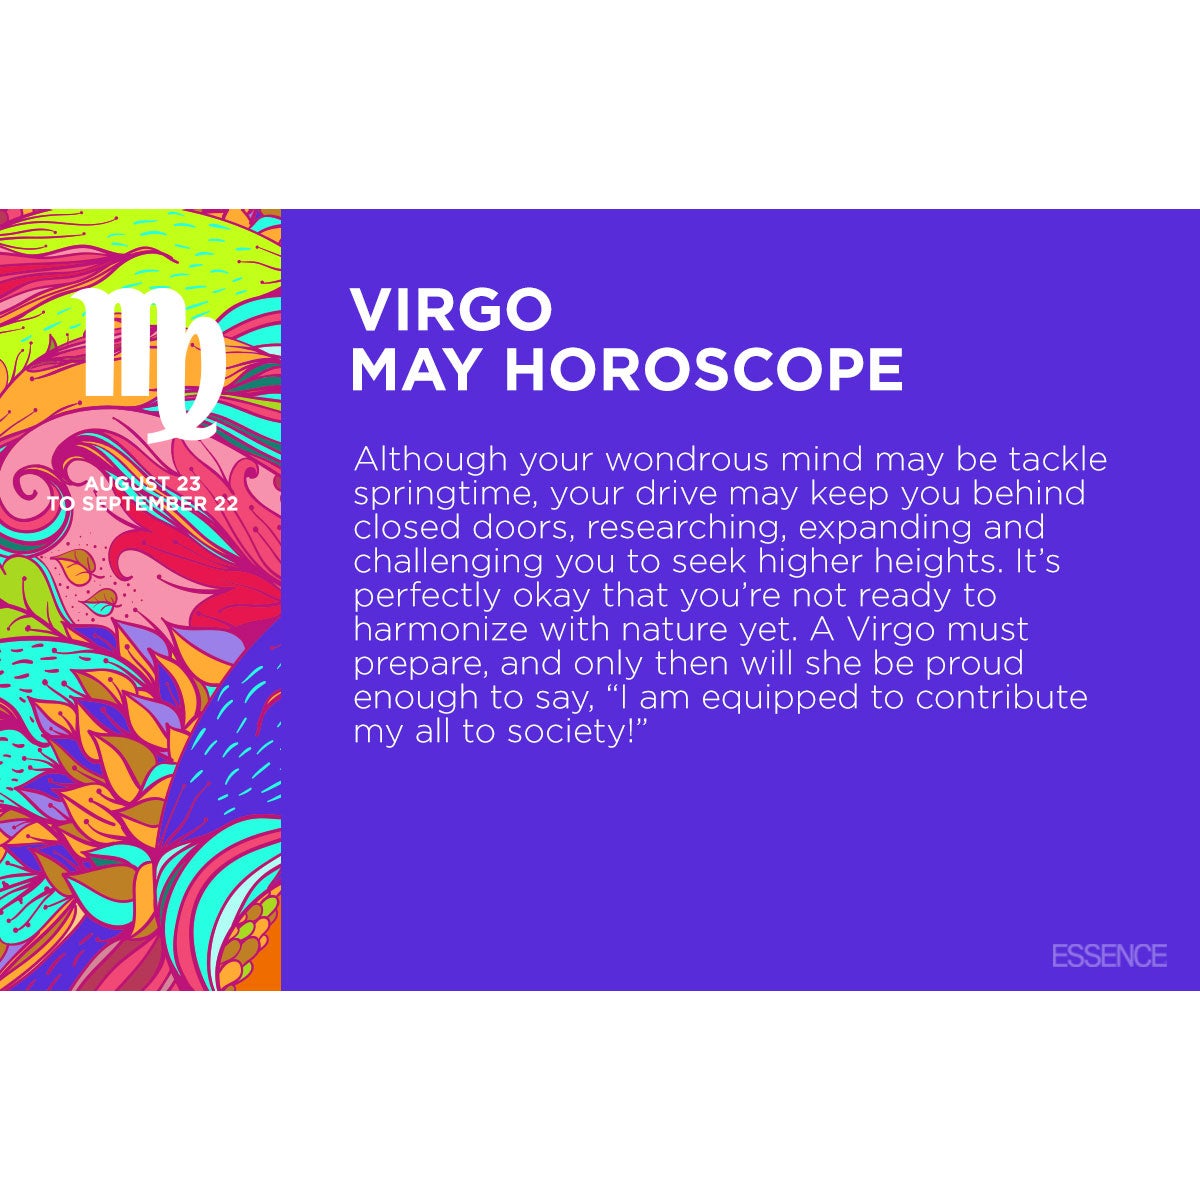 Is It In the Stars? See Your May Horoscope
